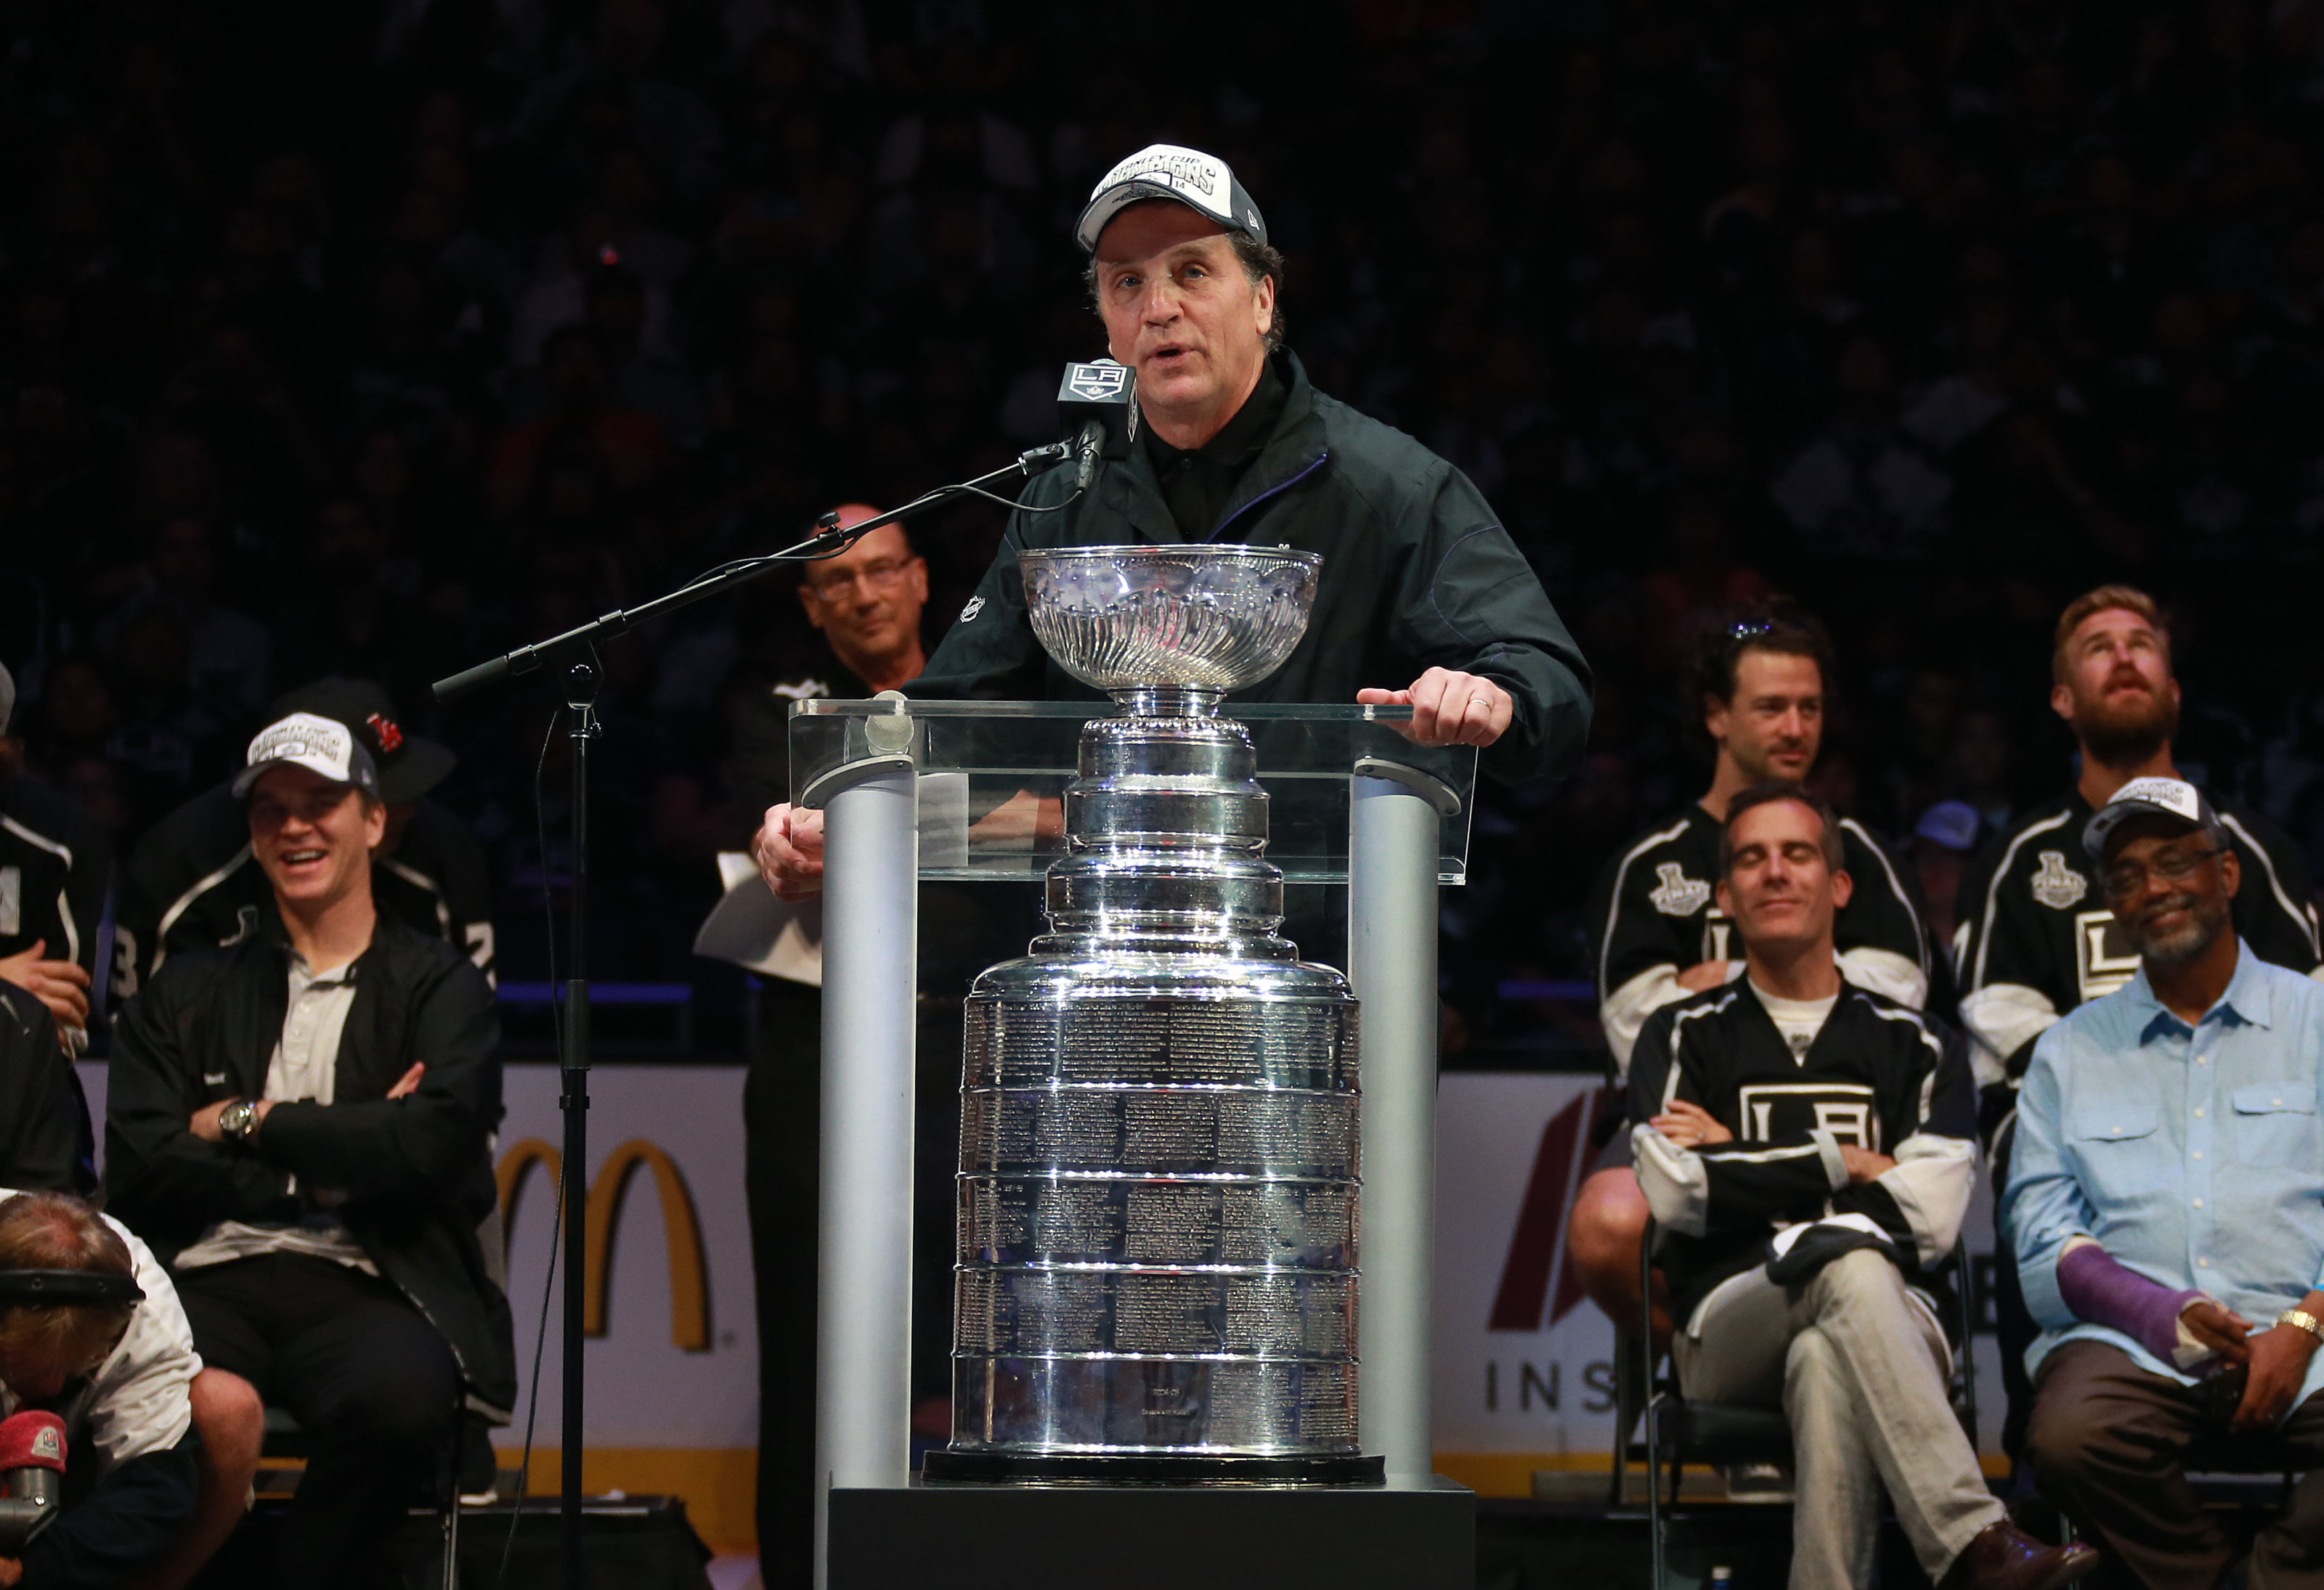 LA Kings build another contender 8 years after raising Cup – KGET 17